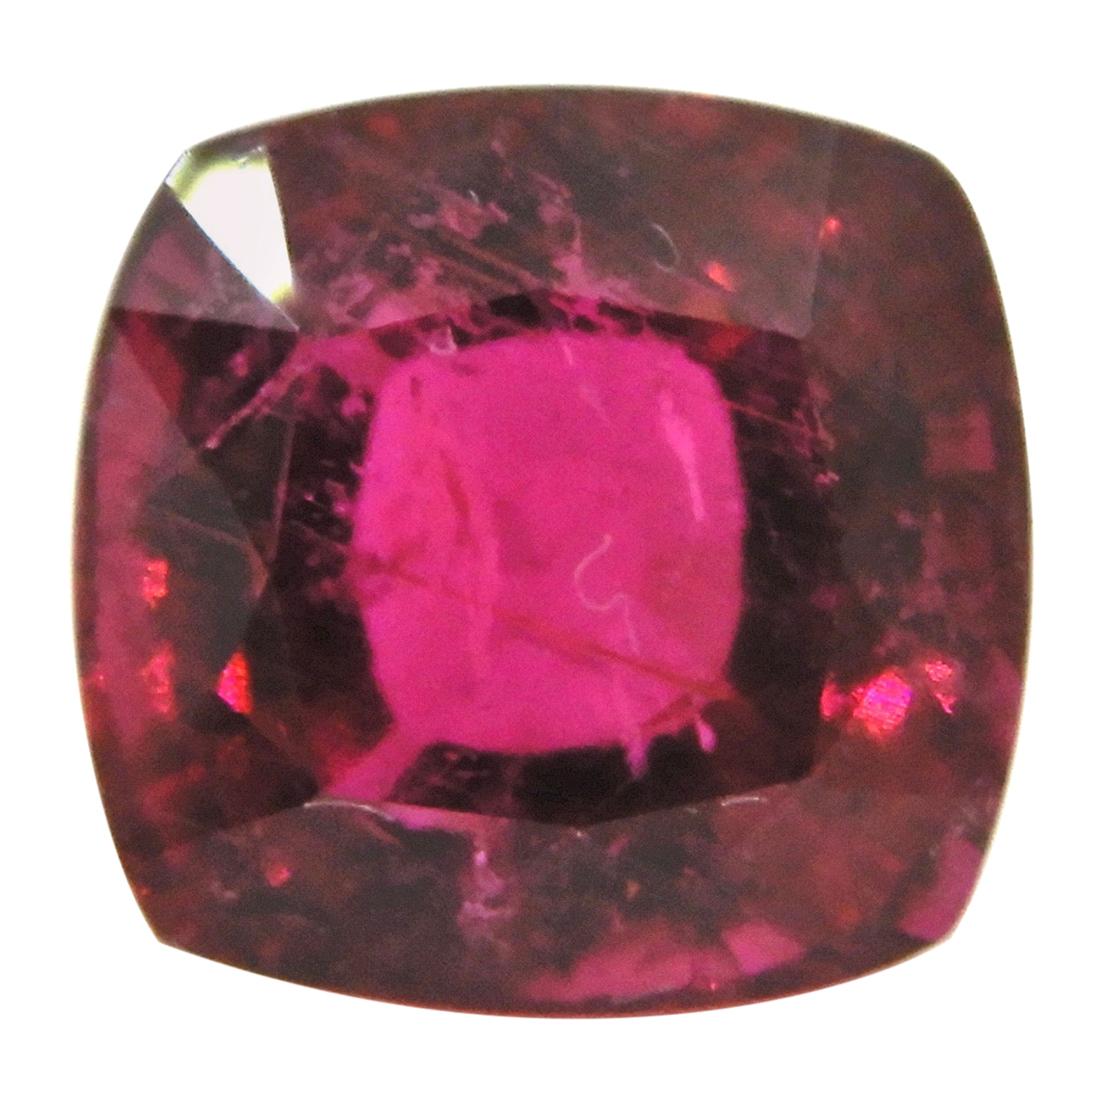 Create the ring of your dreams with this luscious 6.18 Carat Cushion Cut Rubellite Loose Gemstone. The options are only limited by our collective imaginations! I can create the piece you've always wanted. 

Or we are happy for you to purchase the